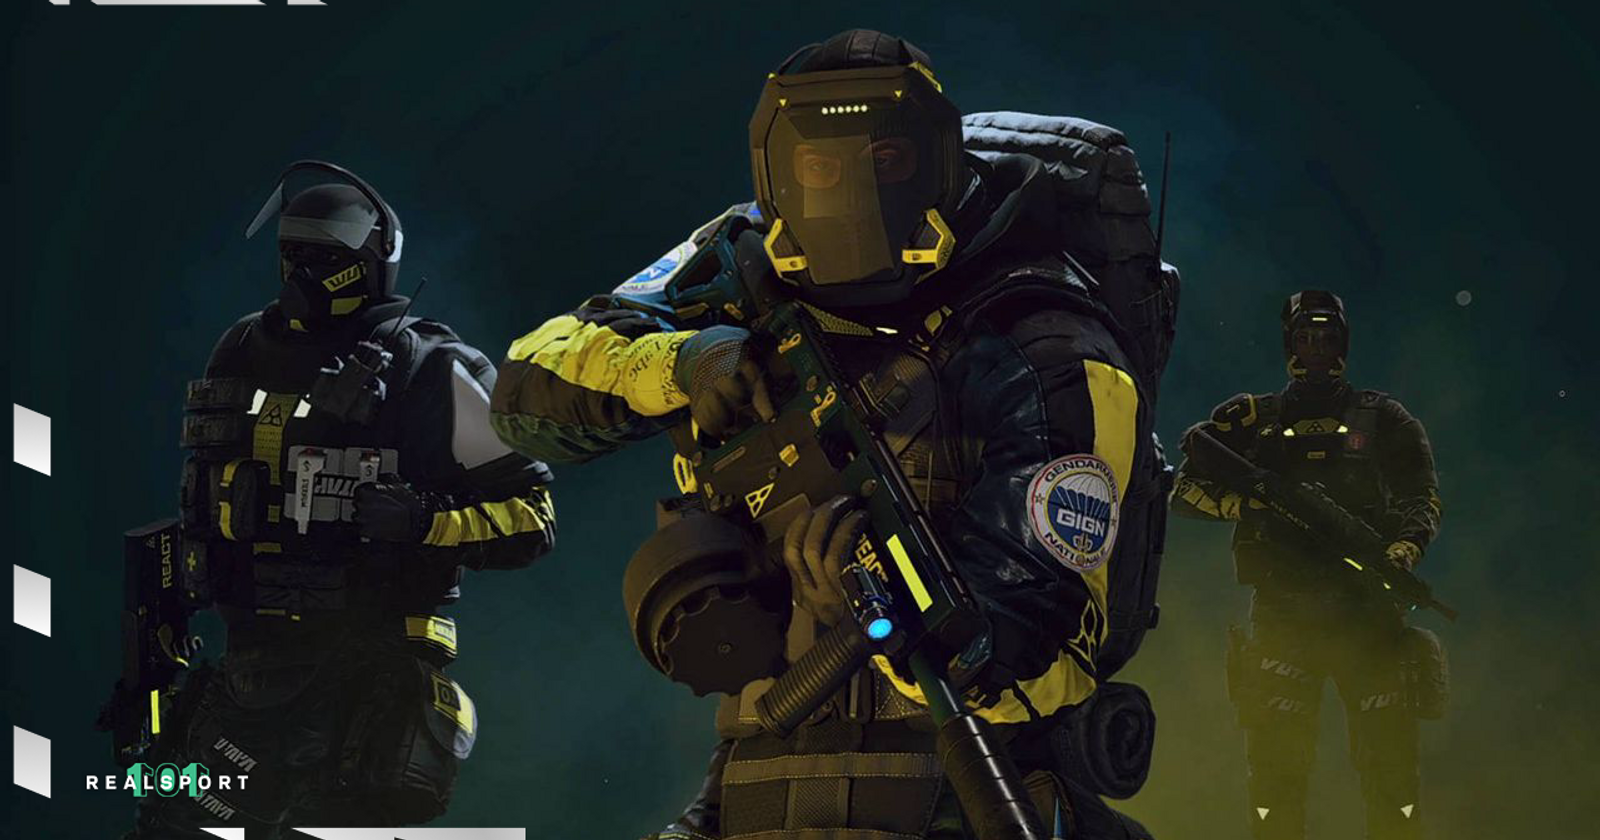 Rainbow Six Extraction to feature crossplay between all platforms